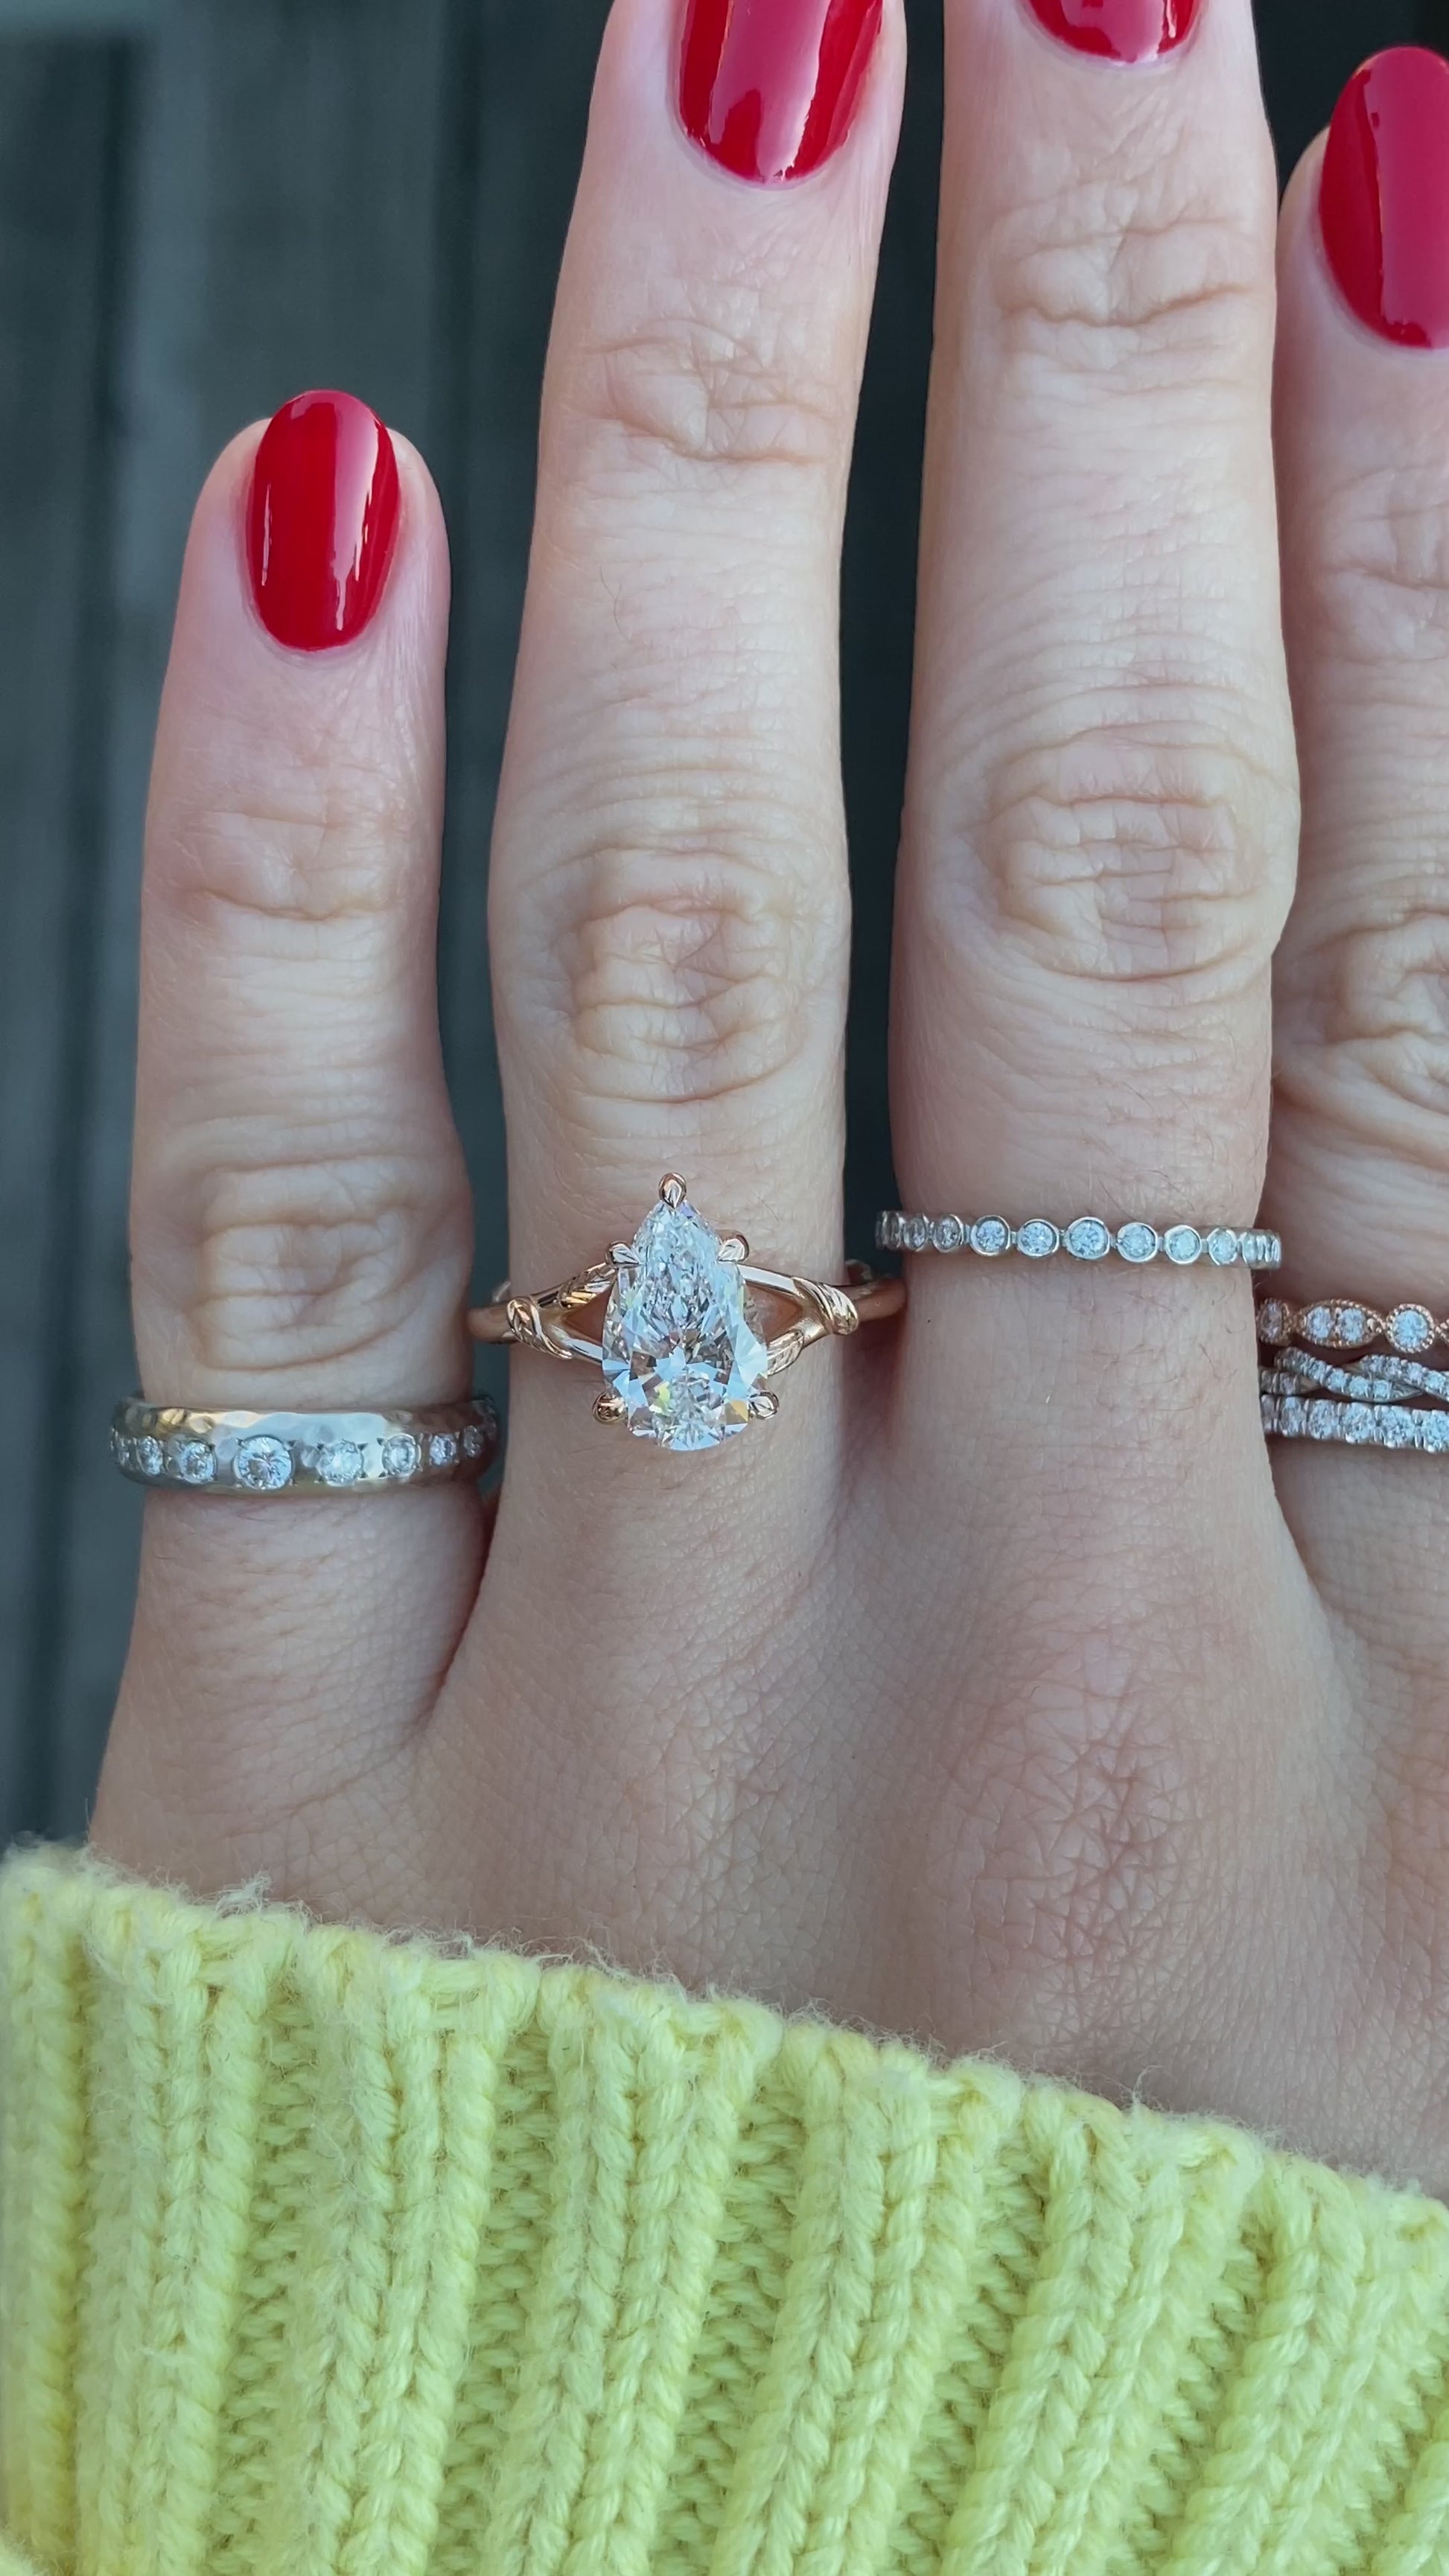 caption:Shown with 2ct pear diamond set in 14k rose gold